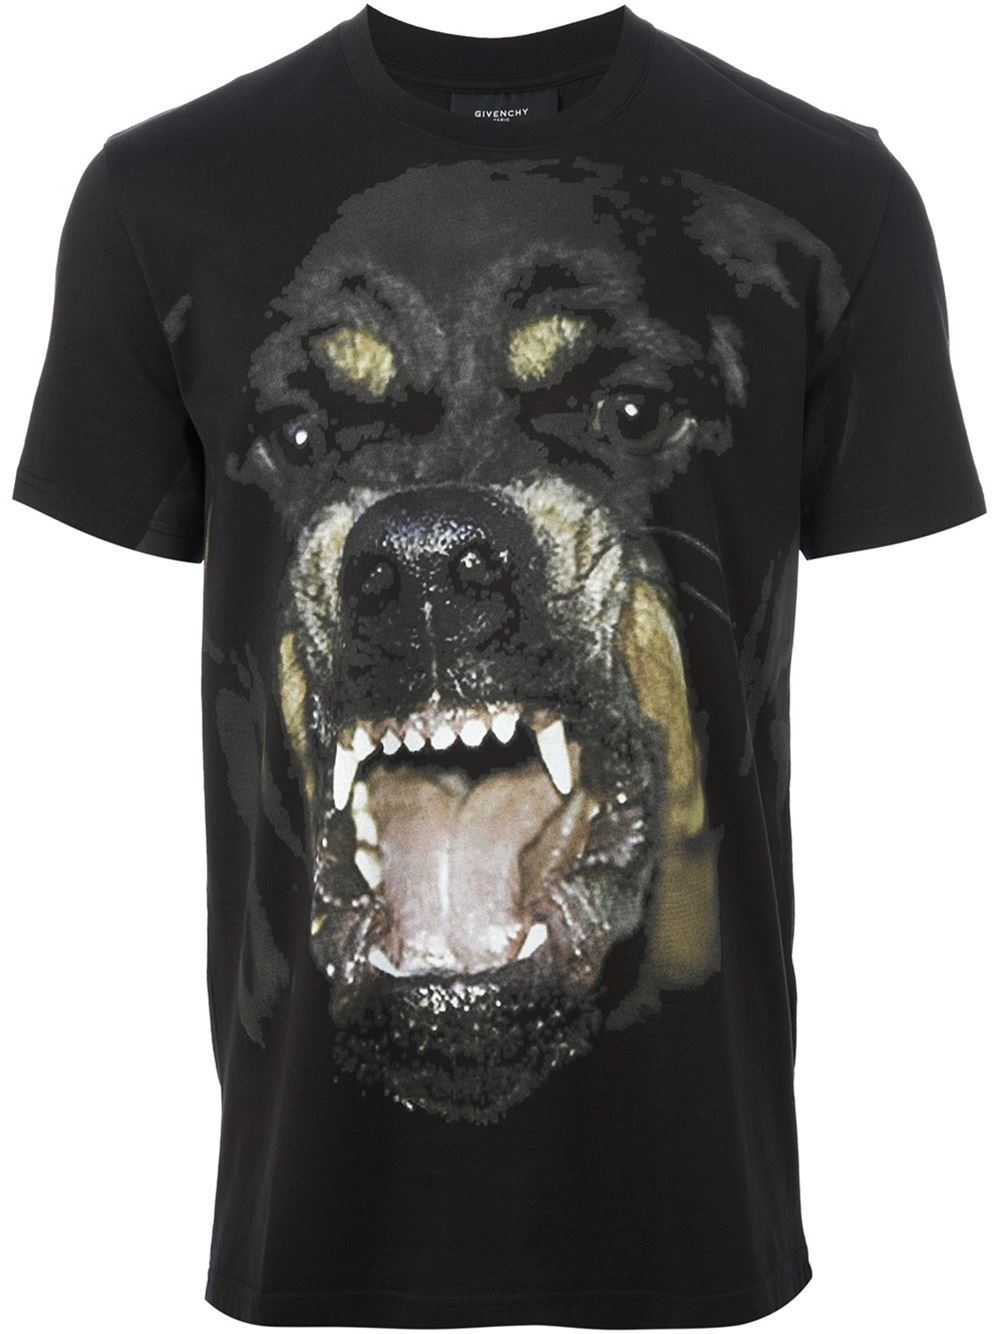 Givenchy Snarling Rottweiler Dog Jersey Tee in Black for Men - Lyst